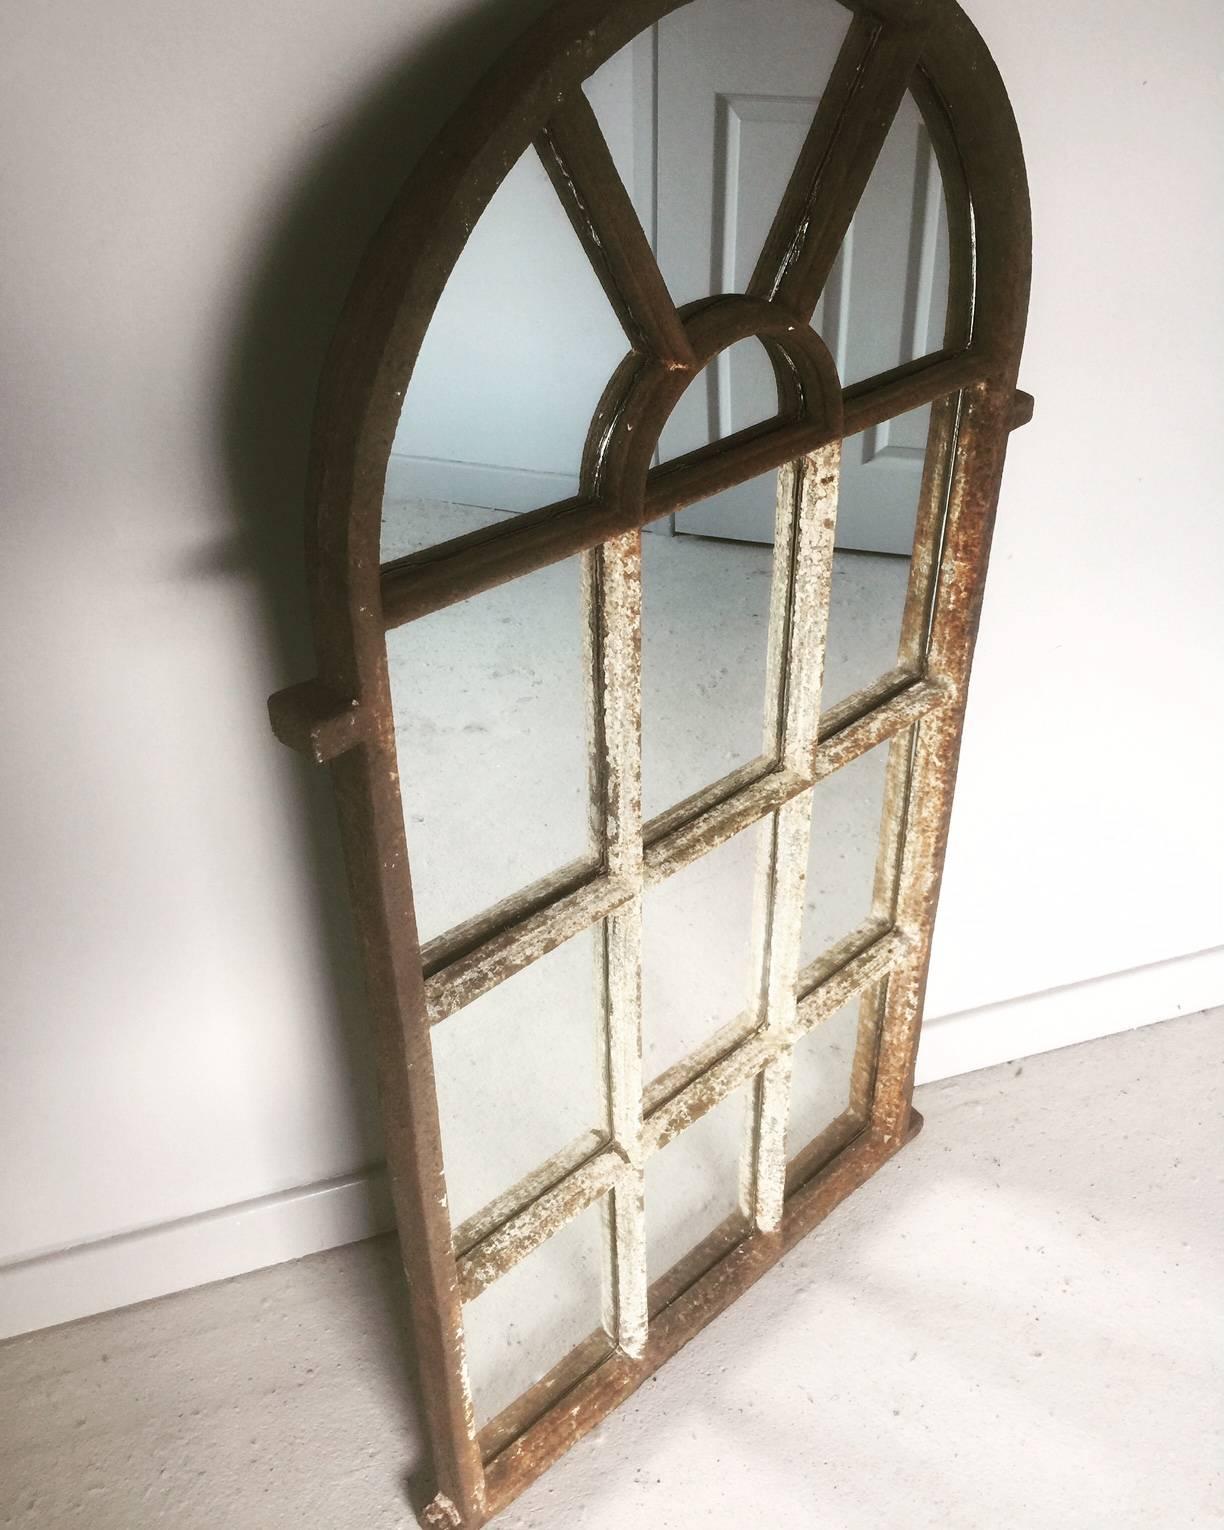 Antique architectural arched top cast iron window frame mirror. This cast iron window frame from a railway cottage in Yorkshire has been converted in to a mirror with the remains of old paint still visible and a natural aged patina suitable for